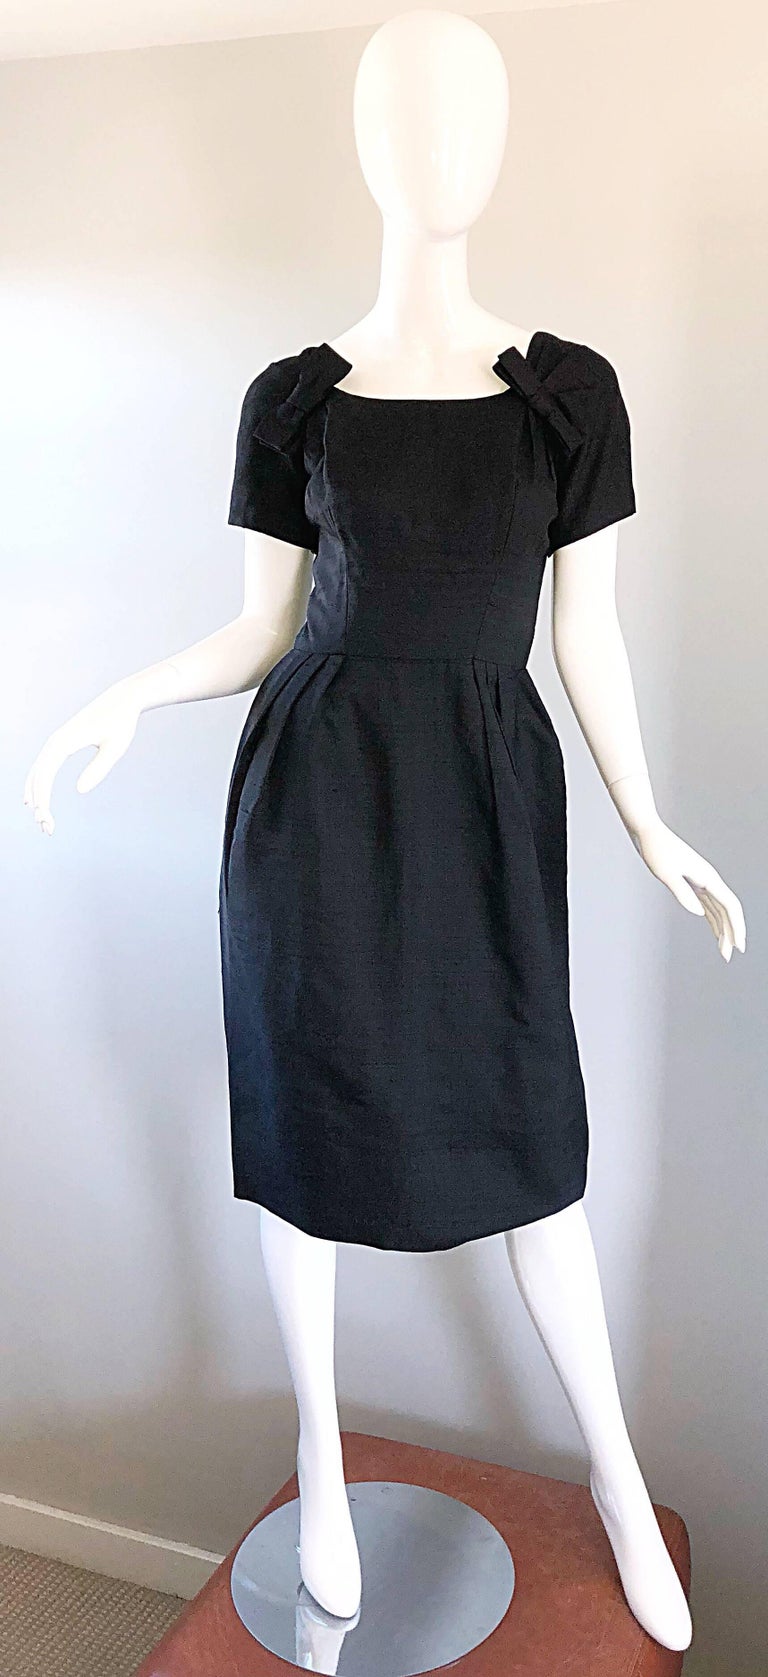 Gorgeous 1950s SUZY PERETTE black silk shantung short sleeve bombshell dress! Features a tailored fitted bodice with a flattering and forgiving full skirt. Bow detail at each side of the neck adds just the right amount of detail. Full metal zipper